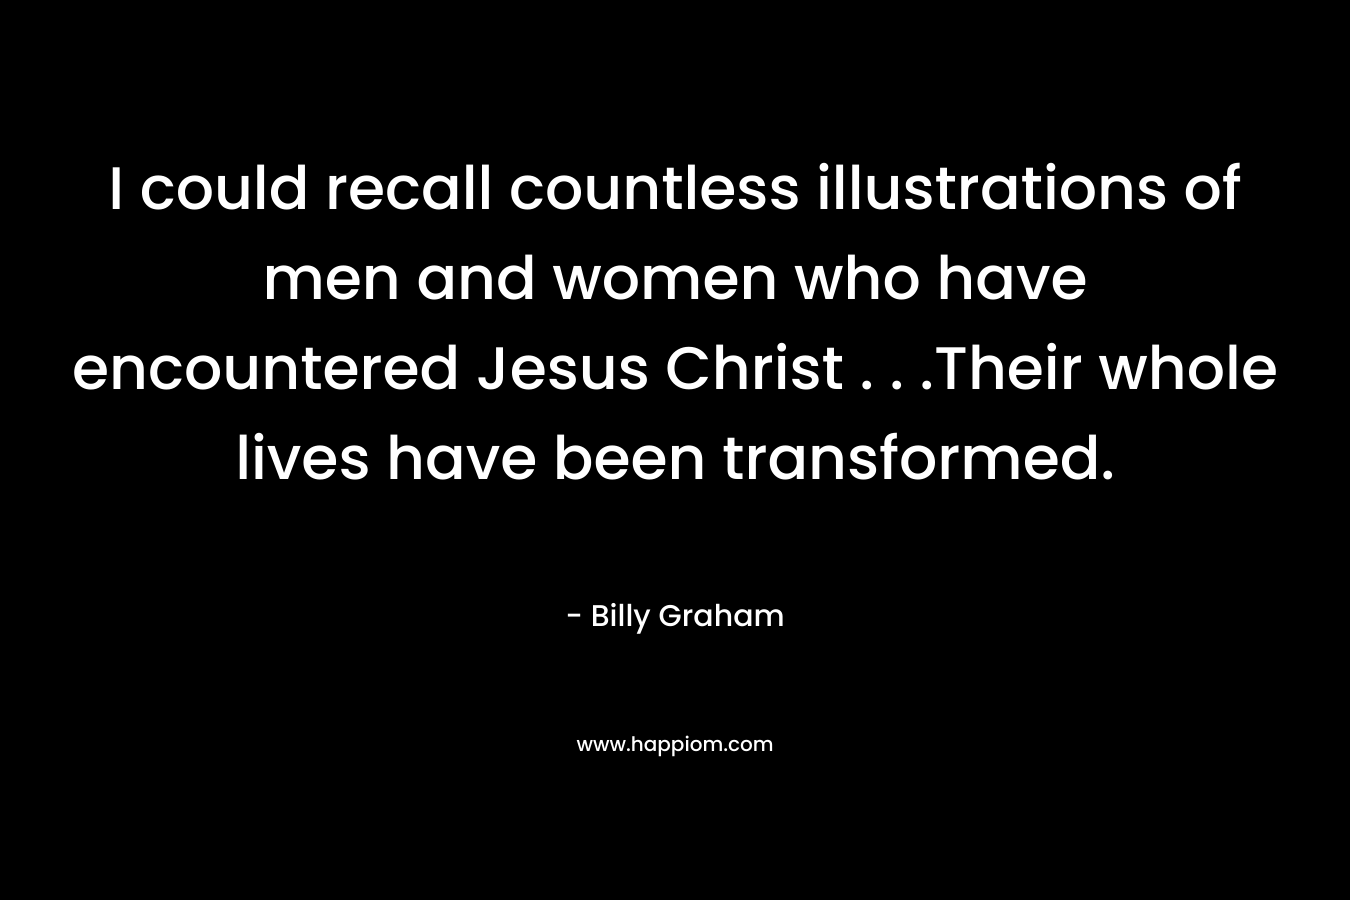 I could recall countless illustrations of men and women who have encountered Jesus Christ . . .Their whole lives have been transformed. – Billy Graham